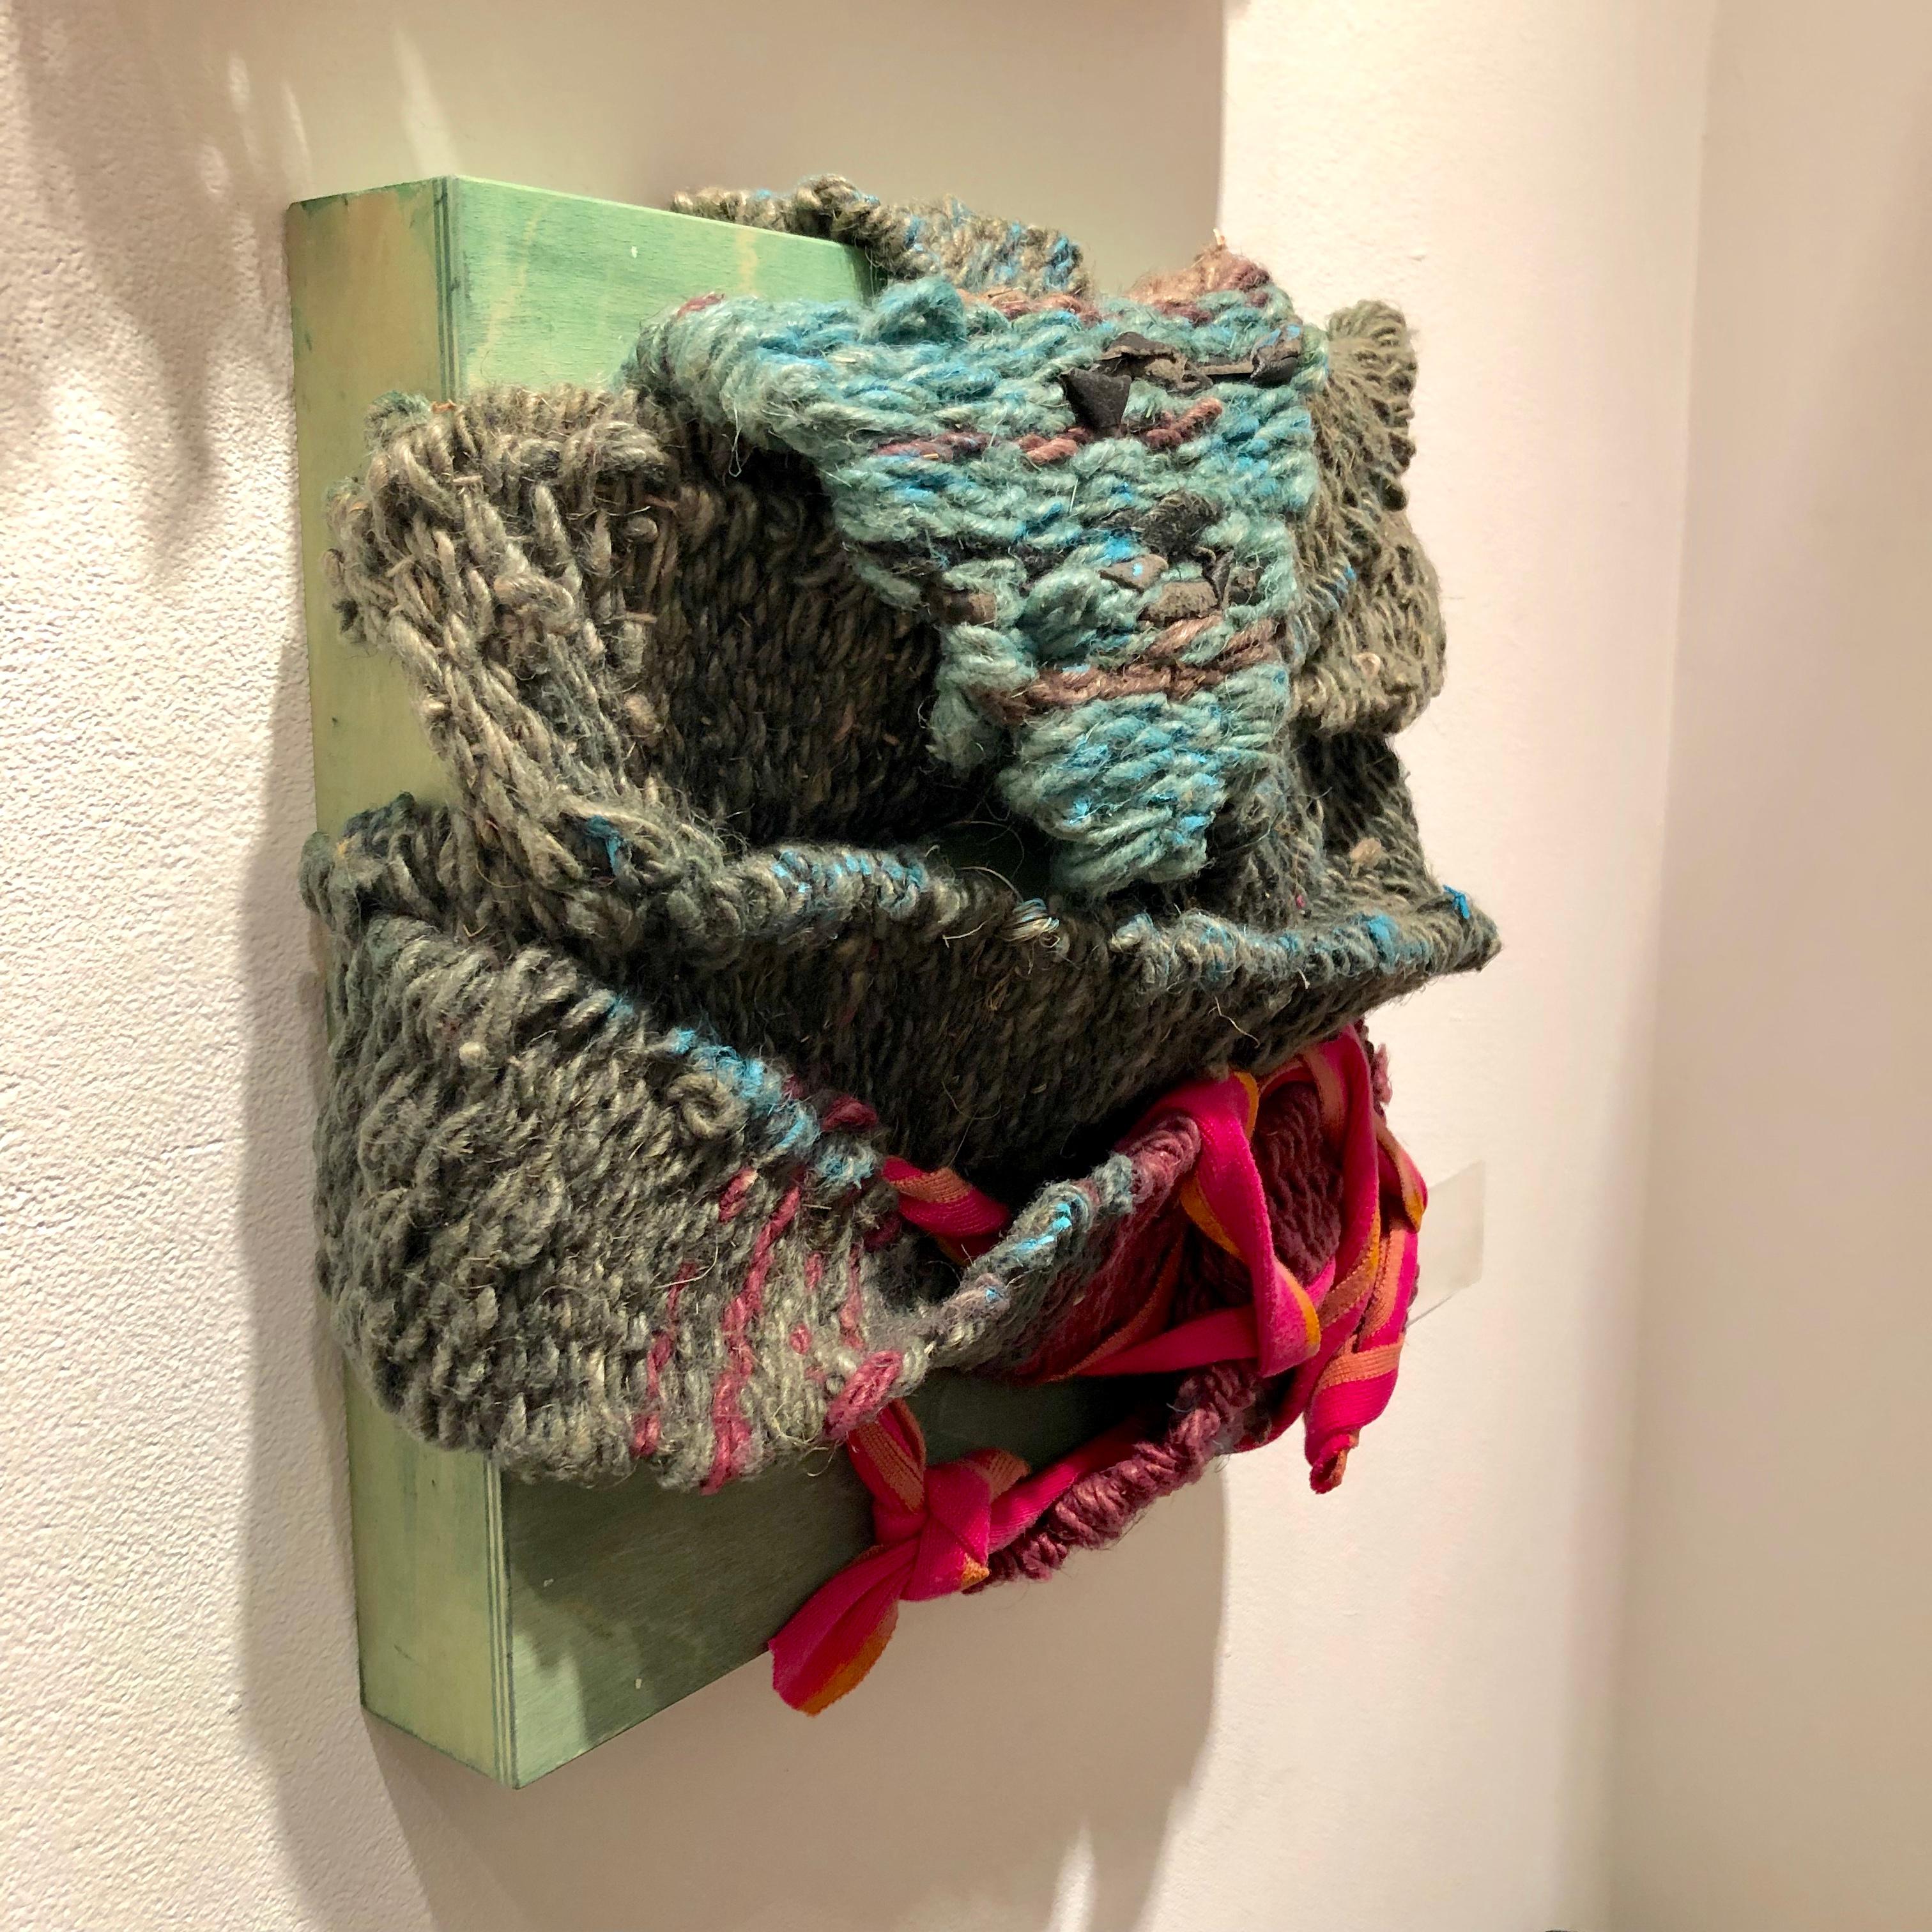 Fabric sculptures in vibrant, bold color and various interesting textures. Pieces are sold individually and can be combined to create a larger composition. 

Diane Cooper’s subtle use of materials was inspired by Japanese aesthetic. Living in Japan,